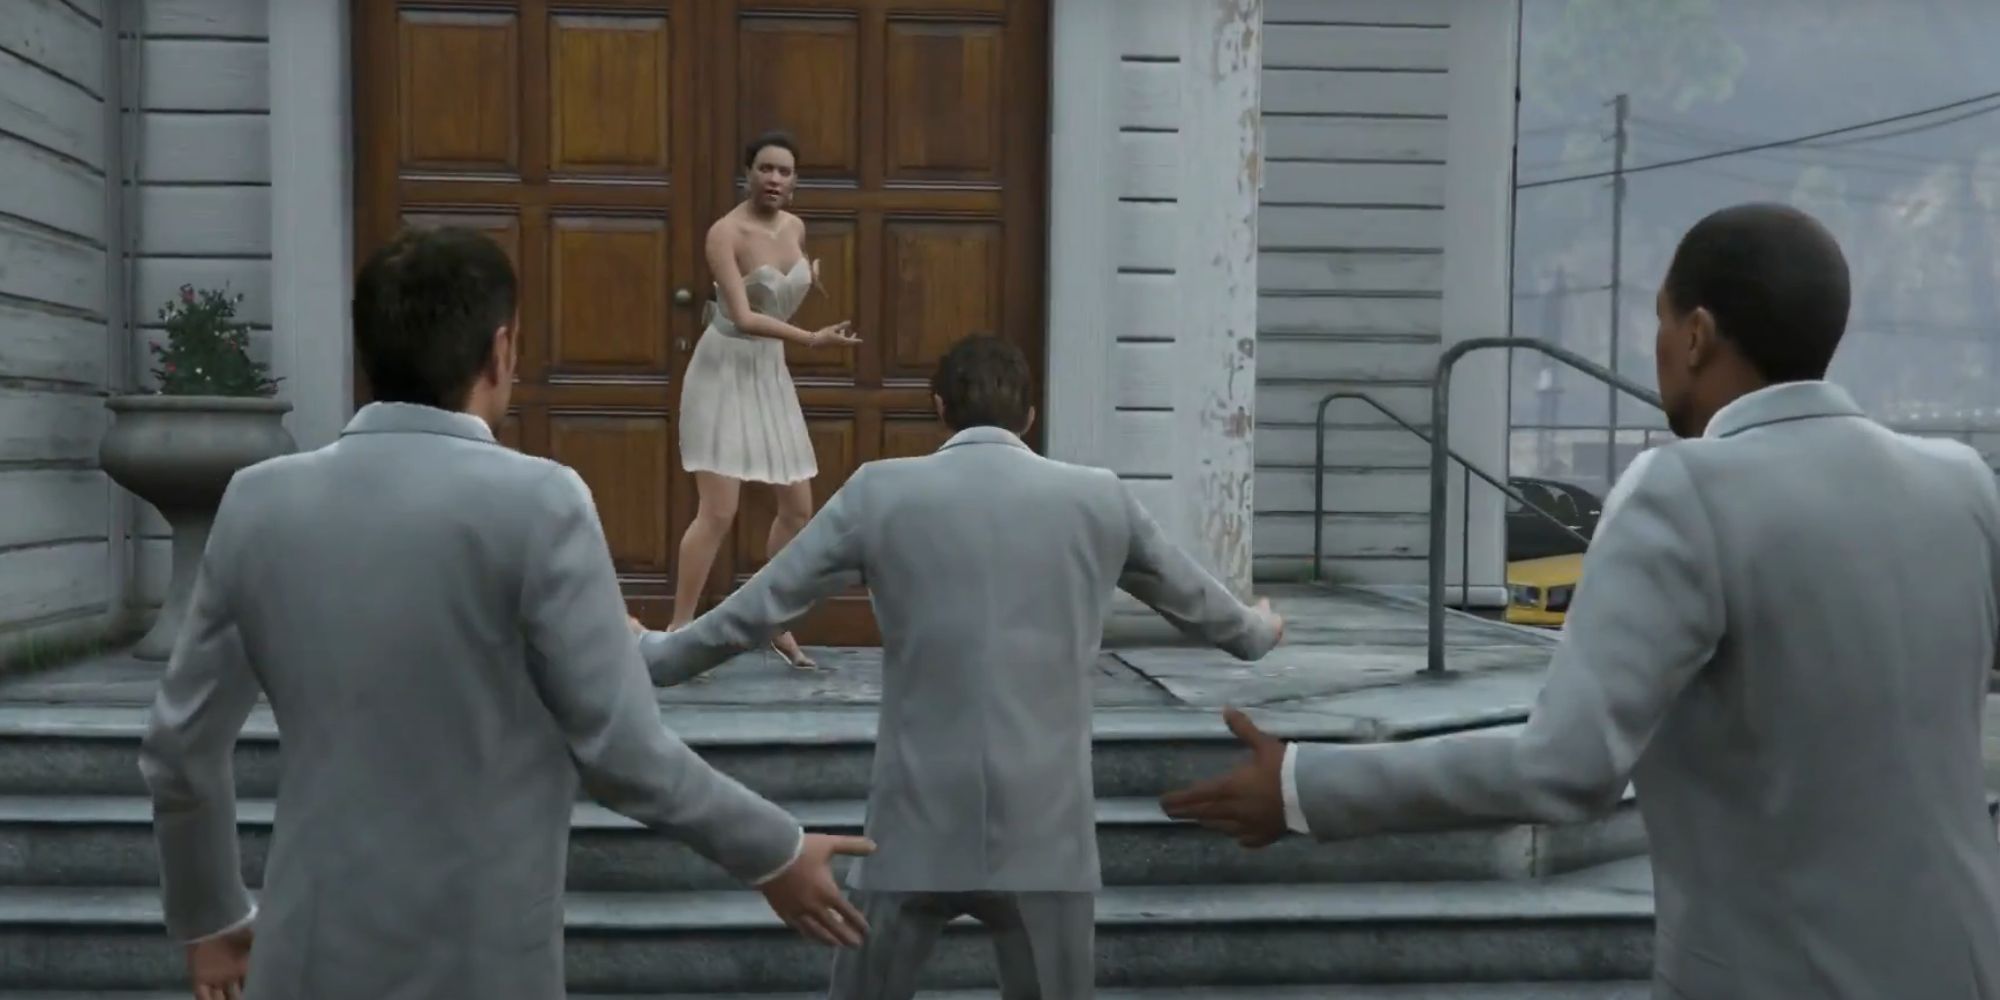 Grand Theft Auto 5 Screenshot Of Groom and Groomsmen Arriving Late To The Wedding During Stag Do Running Man